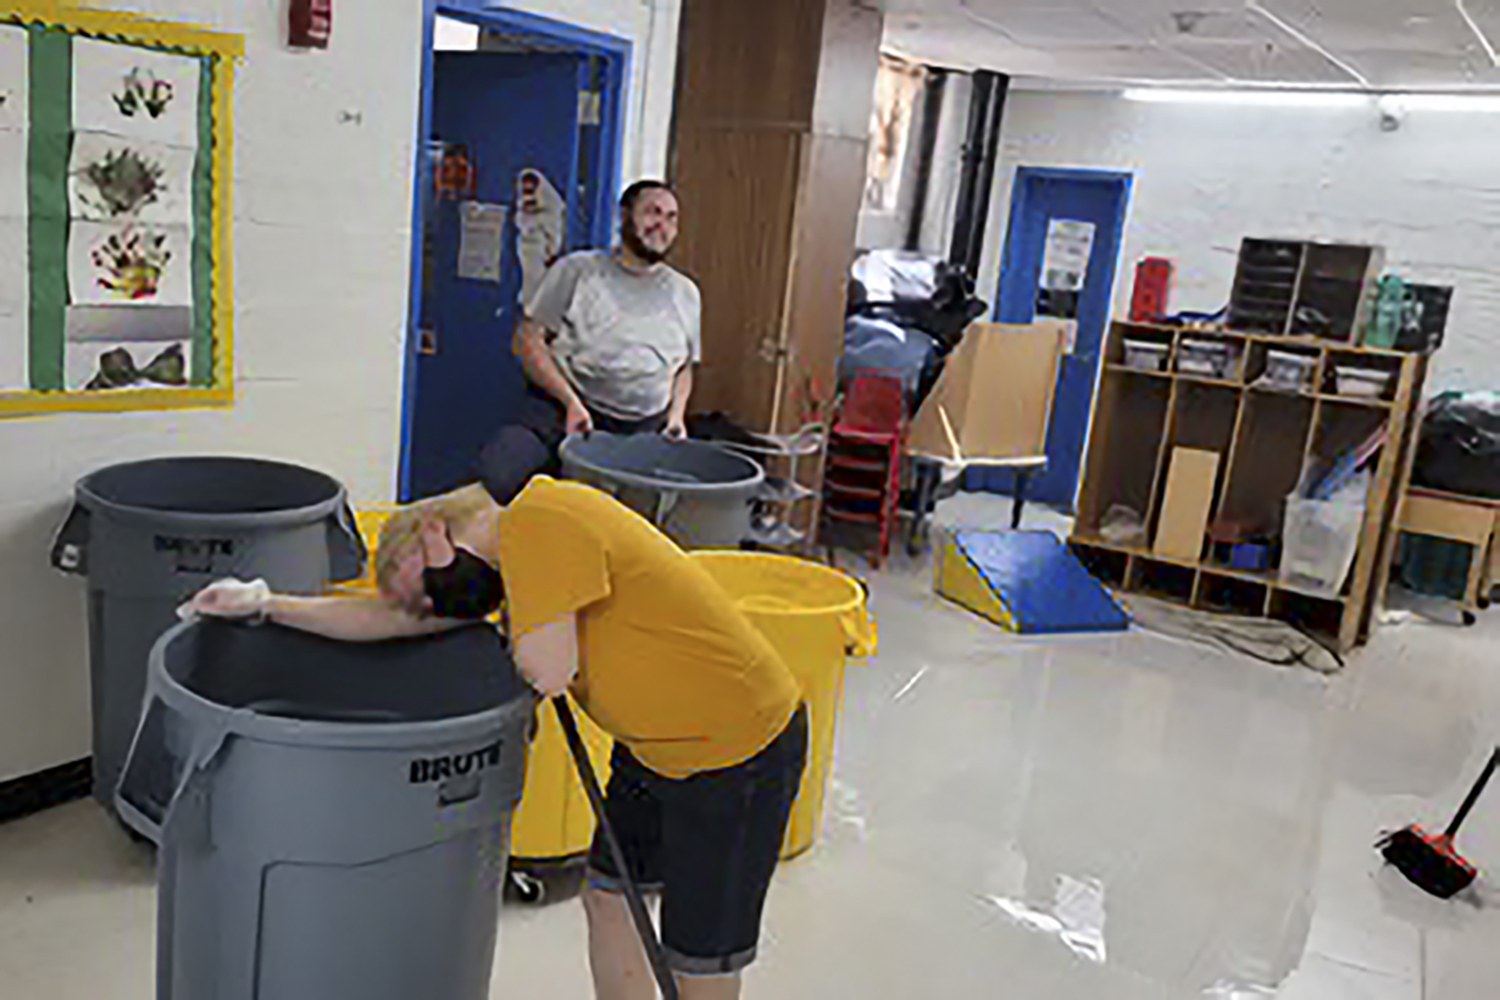 A photo of two people with plastic bins standing in a room with a flooded floor